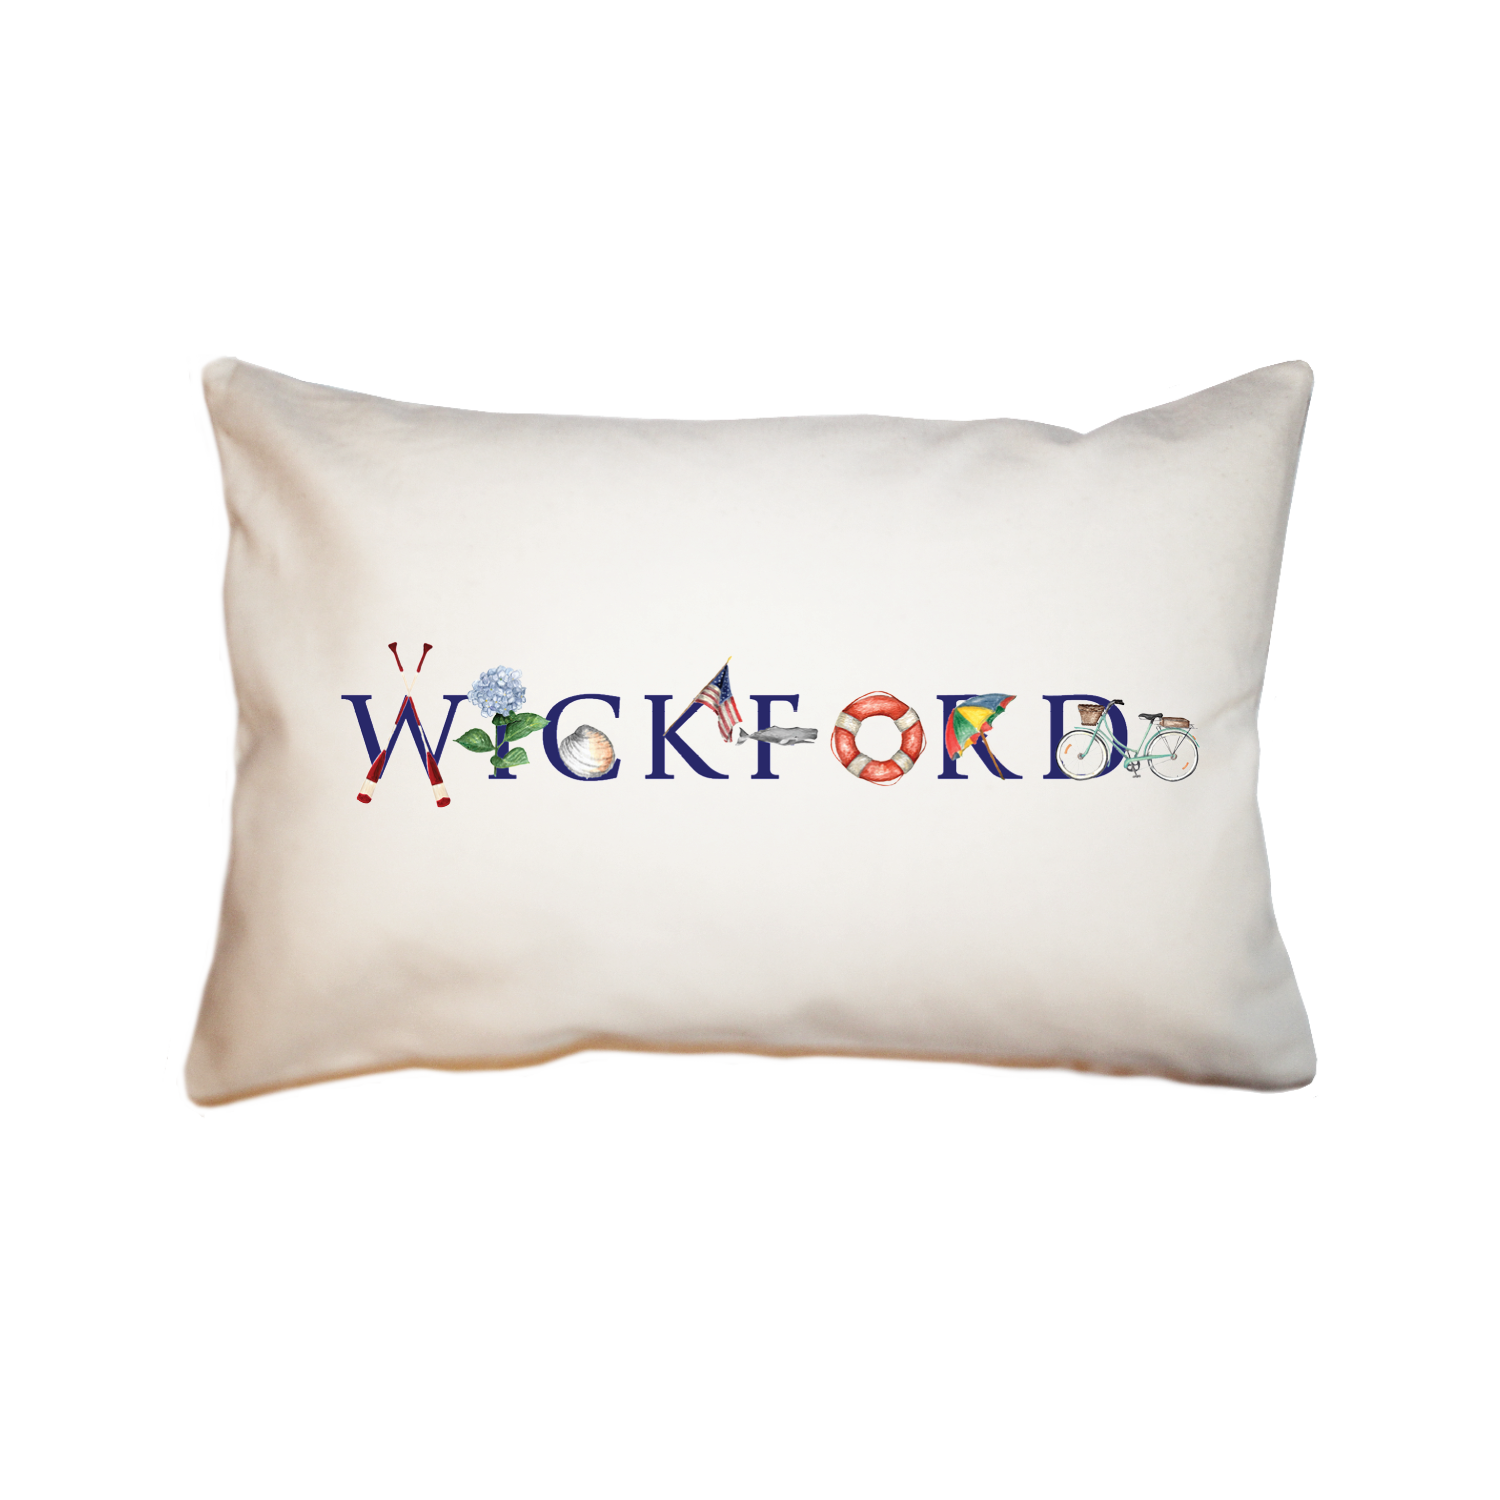 wickford large rectangle pillow